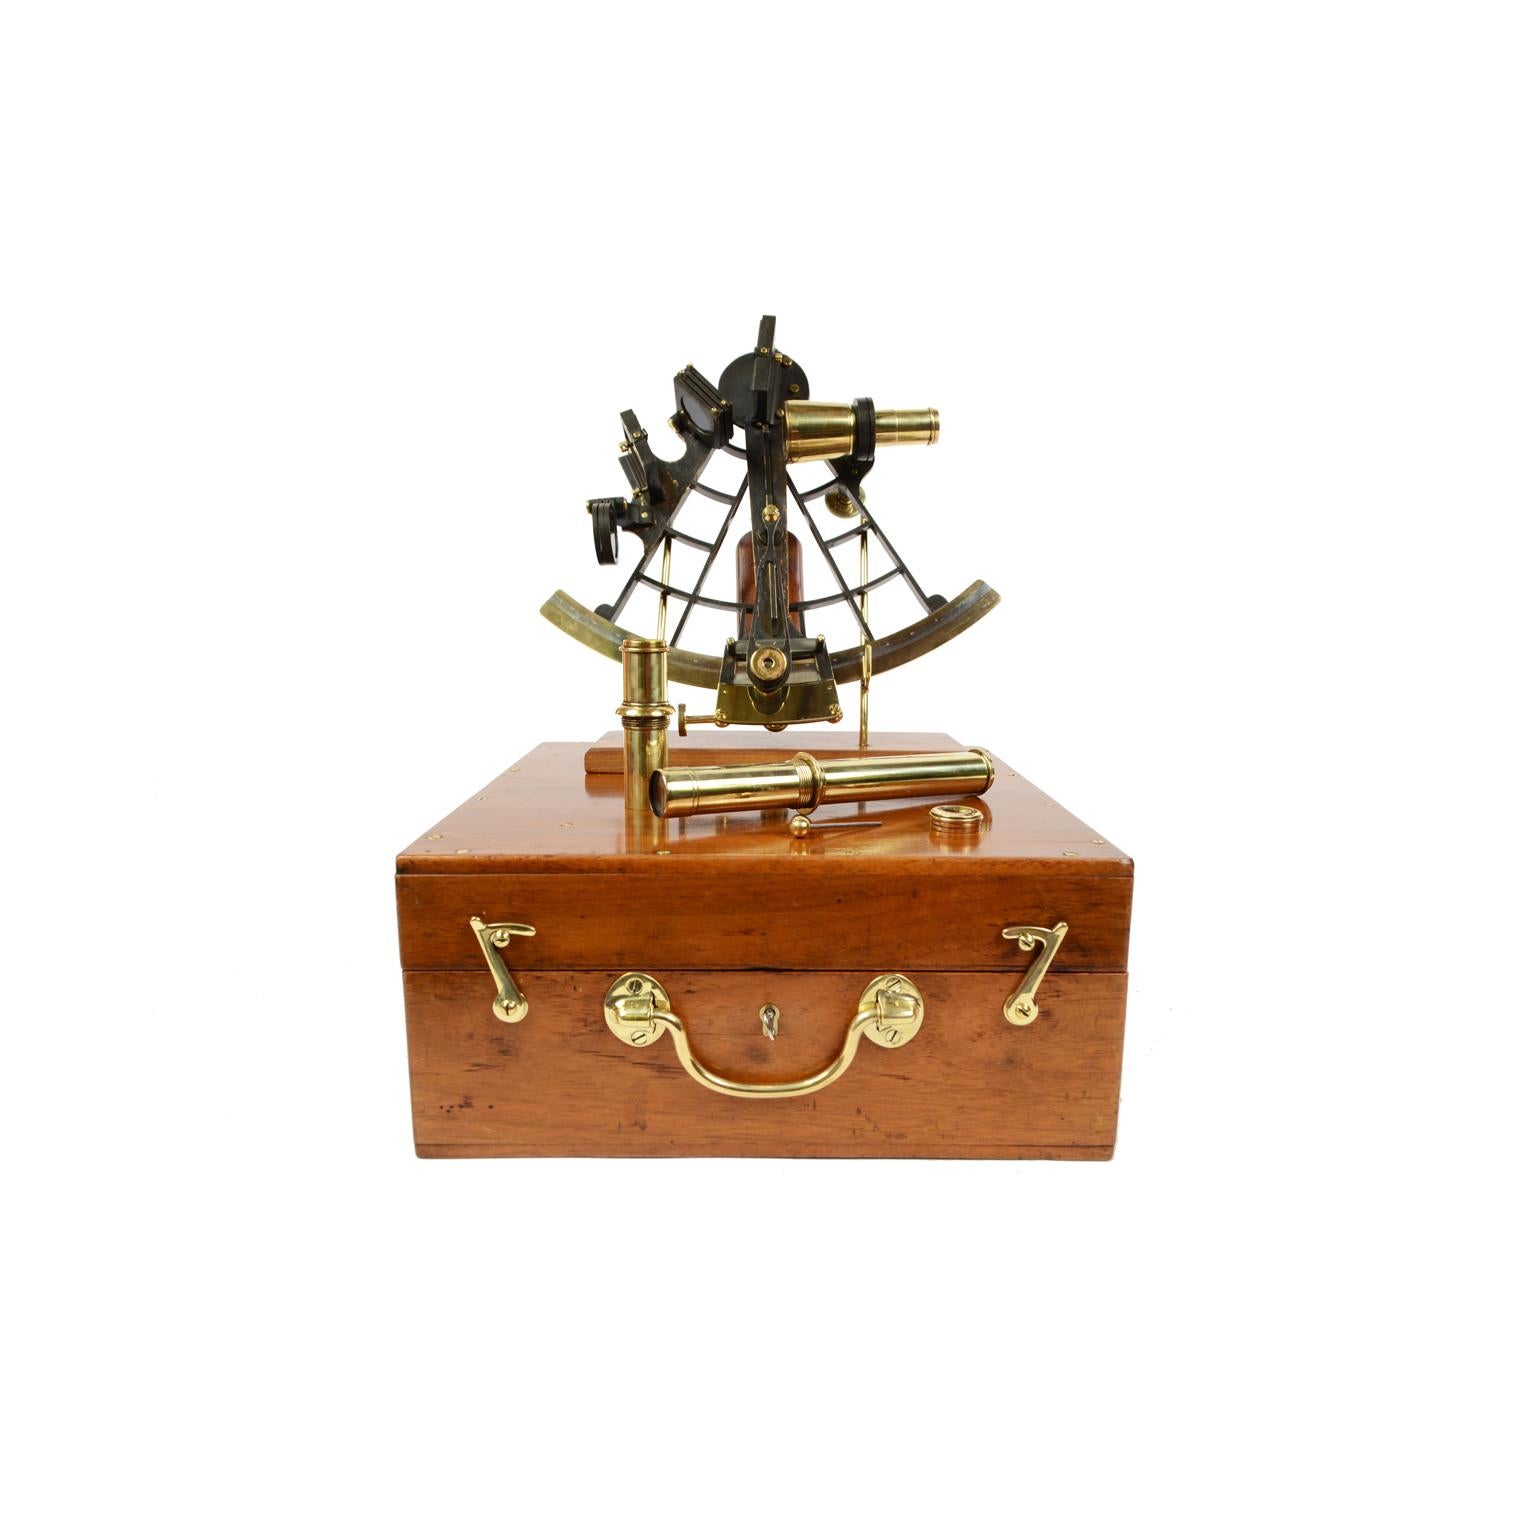 Burnished brass sextant from the second half of the 19th century signed Frodsham & Keep Liverpool active in 17 South Castle street, Liverpool between 1856-1878 and placed in its beautiful original mahogany wooden box, complete with key lock, hinges,